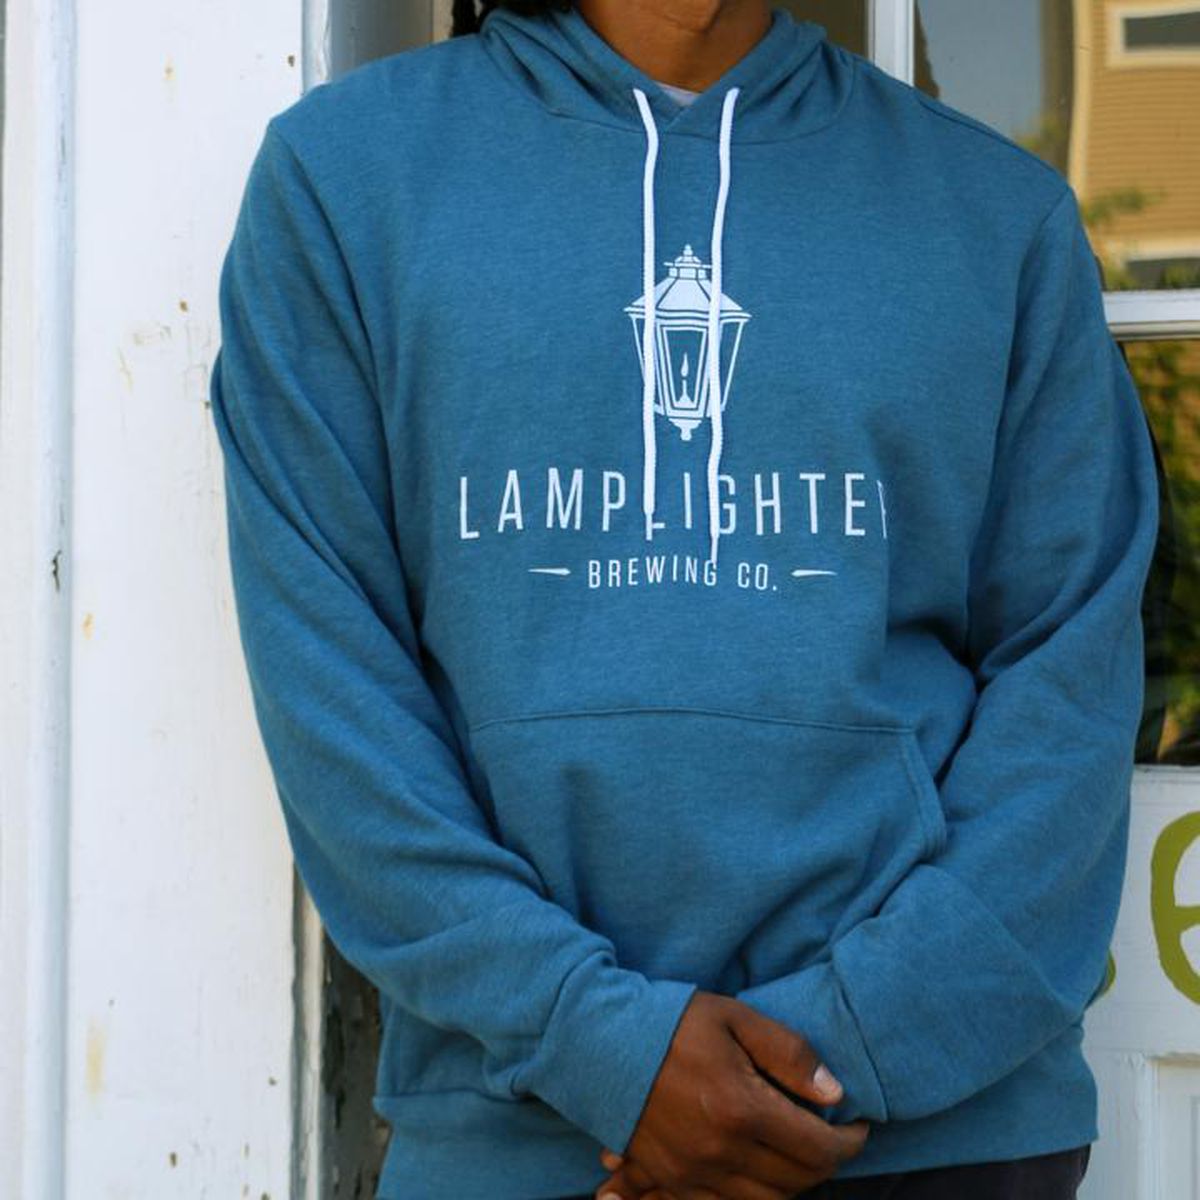 Light blue, almost turquoise, standard hoodie with kangaroo pocket and white strings. It features a white logo for Lamplighter Brewing Co., including old-fashioned street lamp imagery.